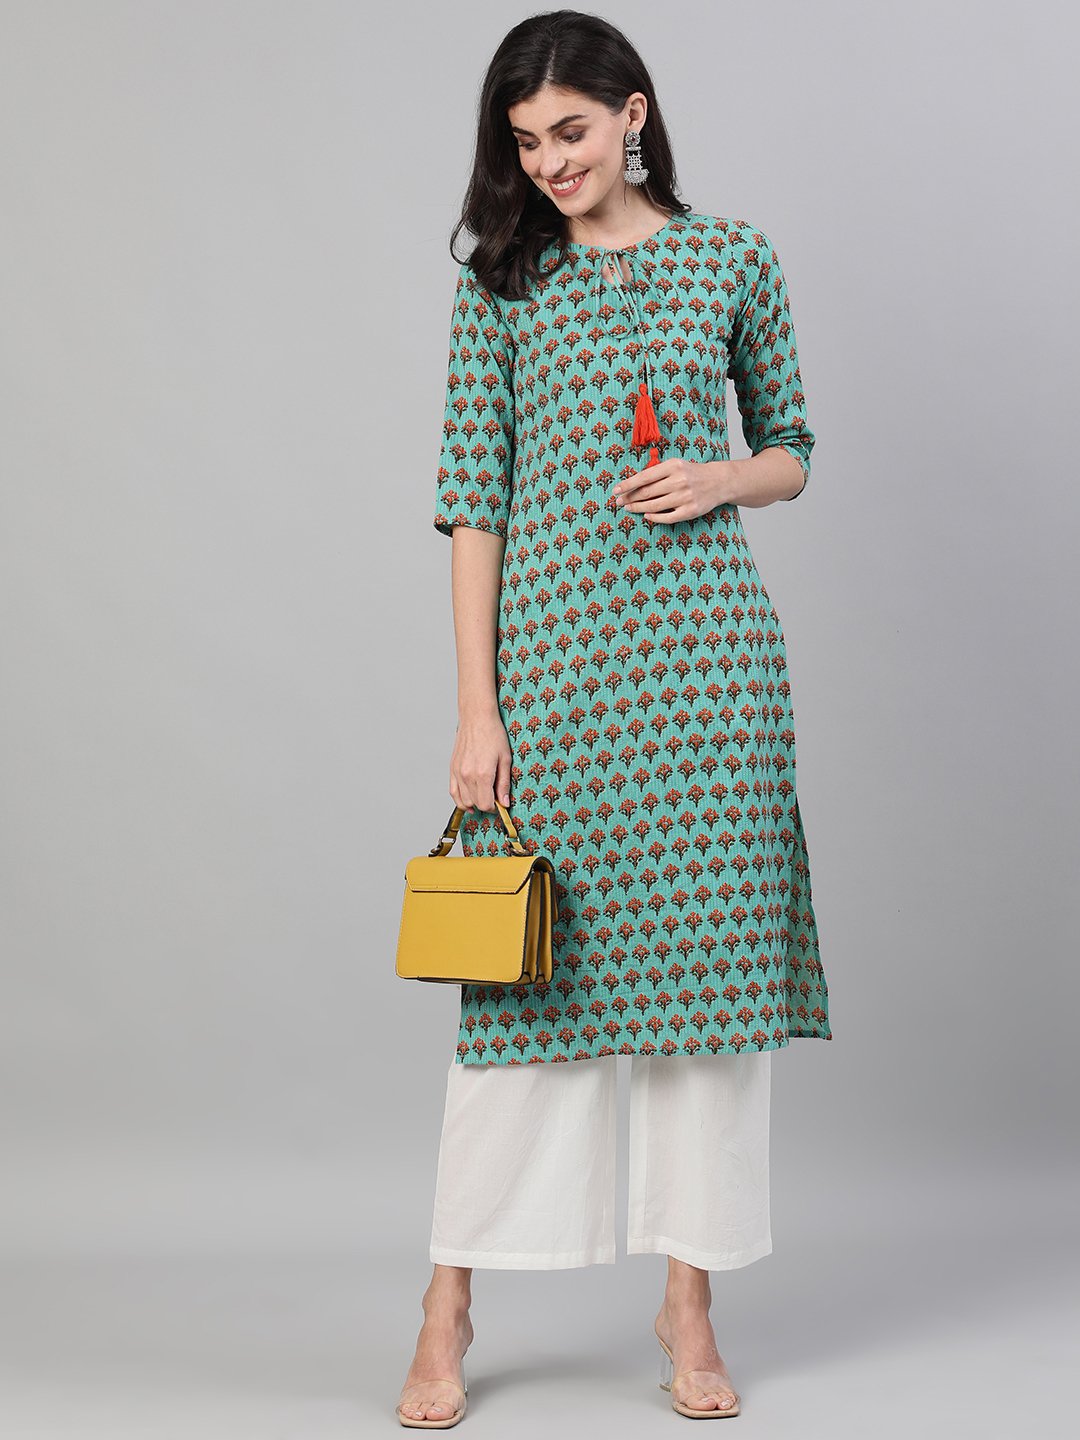 Women's Green Calf Length Three-Quarter Sleeves Straight Floral Printed Cotton Kurta With Pockets - Nayo Clothing